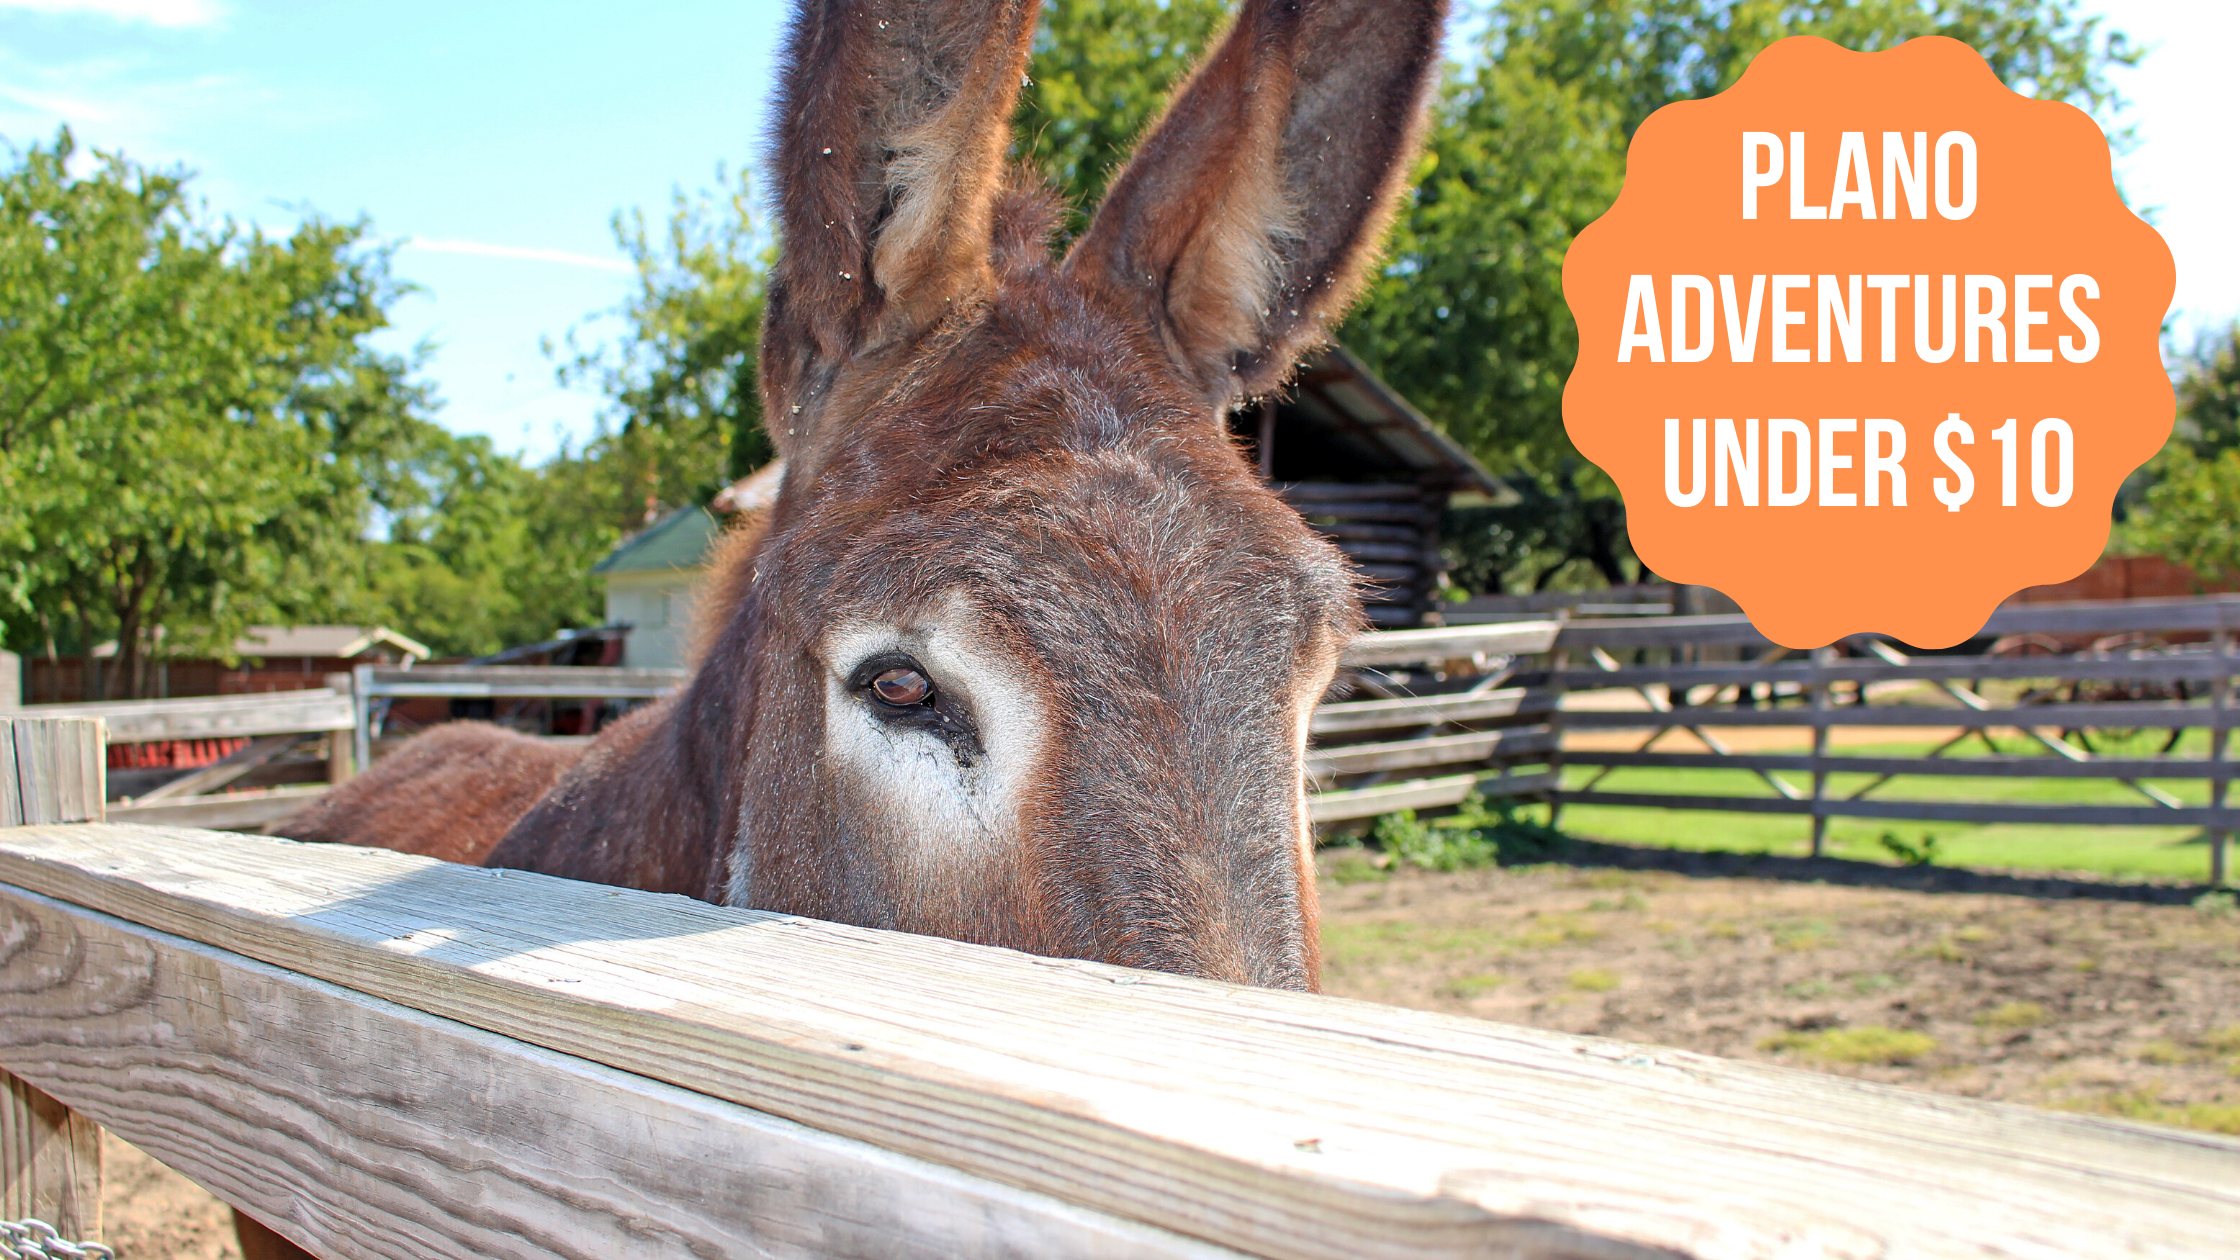 Plano Adventures Under $10 with Heritage Farmstead Museum donkey